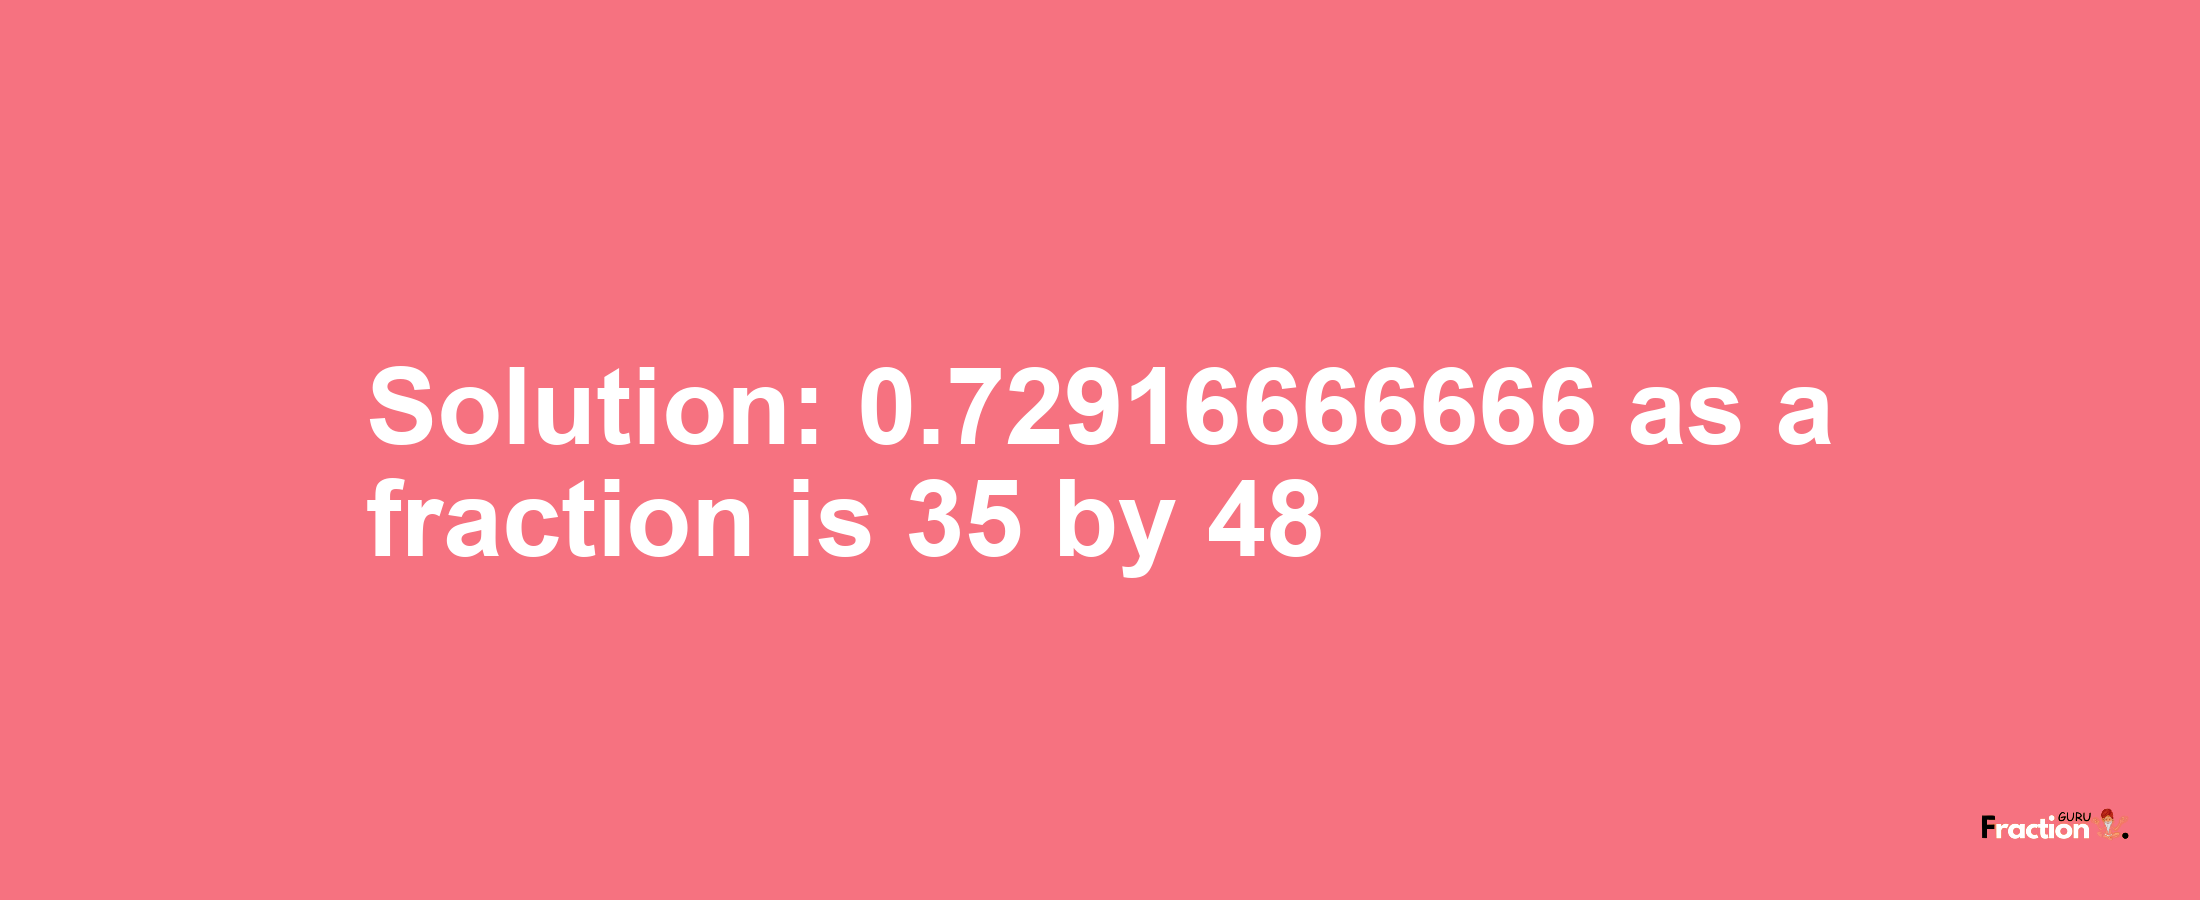 Solution:0.72916666666 as a fraction is 35/48